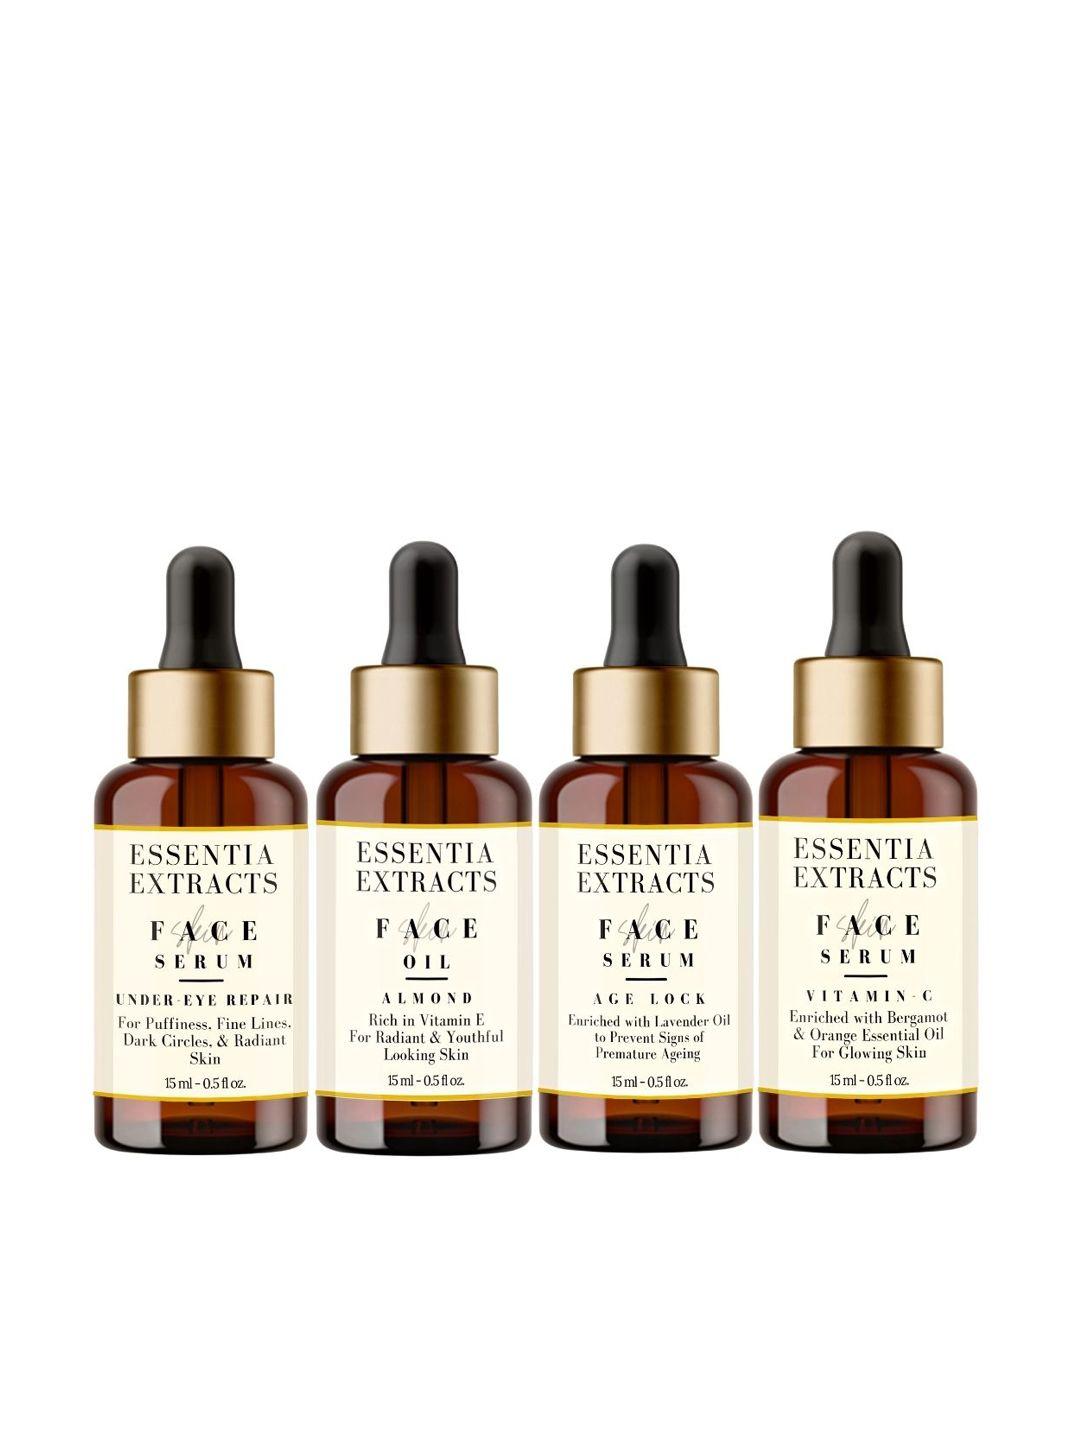 essentia extracts set of face oil & 3 face serums - 15 ml each